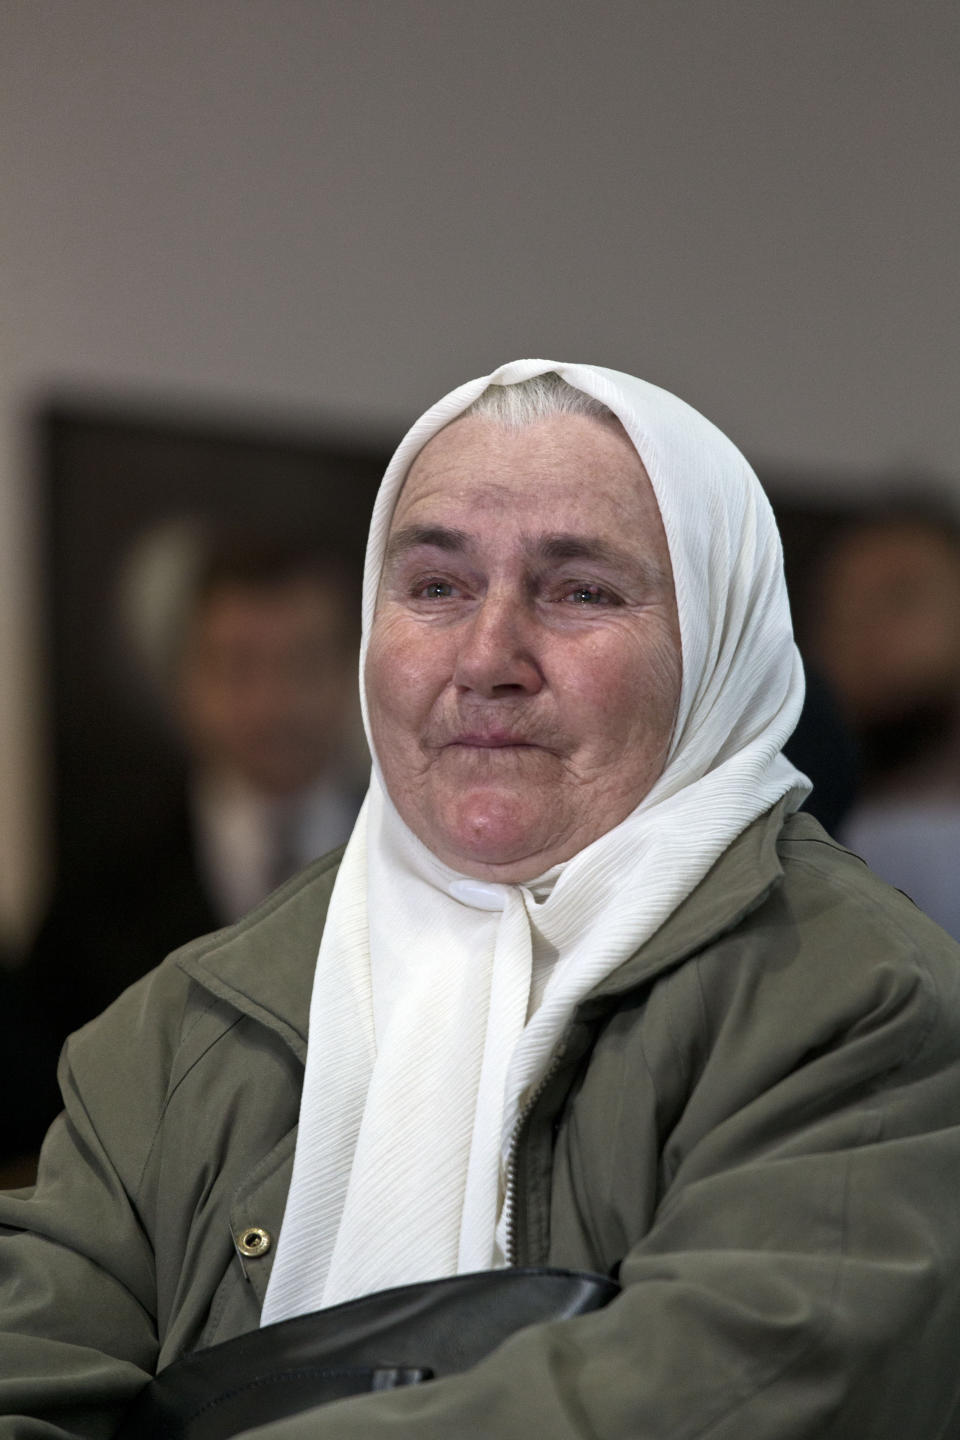 A relative of victims of the Srebrenica genocide cries as she hears the news on the decision of the UN appeals judges on former Bosnian Serb leader Radovan Karadzic in Potocari, Bosnia and Herzegovina, Wednesday, March 20, 2019. United Nations appeals judges on Wednesday upheld the convictions of Karadzic for genocide, war crimes and crimes against humanity, and increased his sentence from 40 years to life imprisonment. (AP Photo/Marko Drobnjakovic)